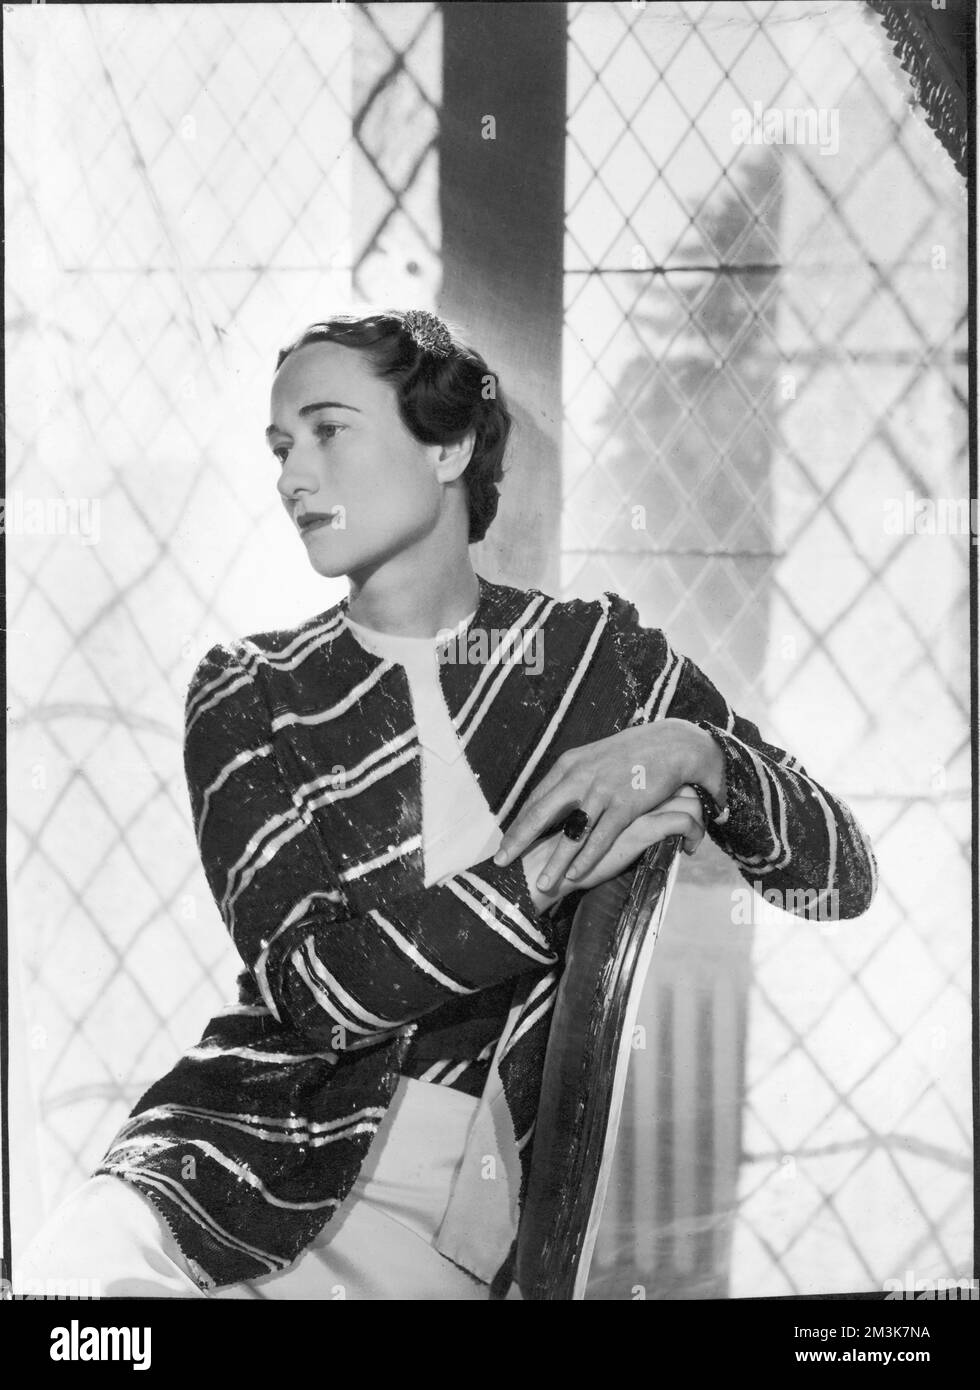 A glamorous studio portrait of Bessie Wallis Warfield Simpson, later Duchess of Windsor (1896-1986), American socialite.  Born in Blue Ridge  Summit, Pennsylvania, she divorced her second husband, Ernest Simpson in order to marry Edward VIII who abdicated the throne in December 1936 to marry her.     Date: 1936 Stock Photo